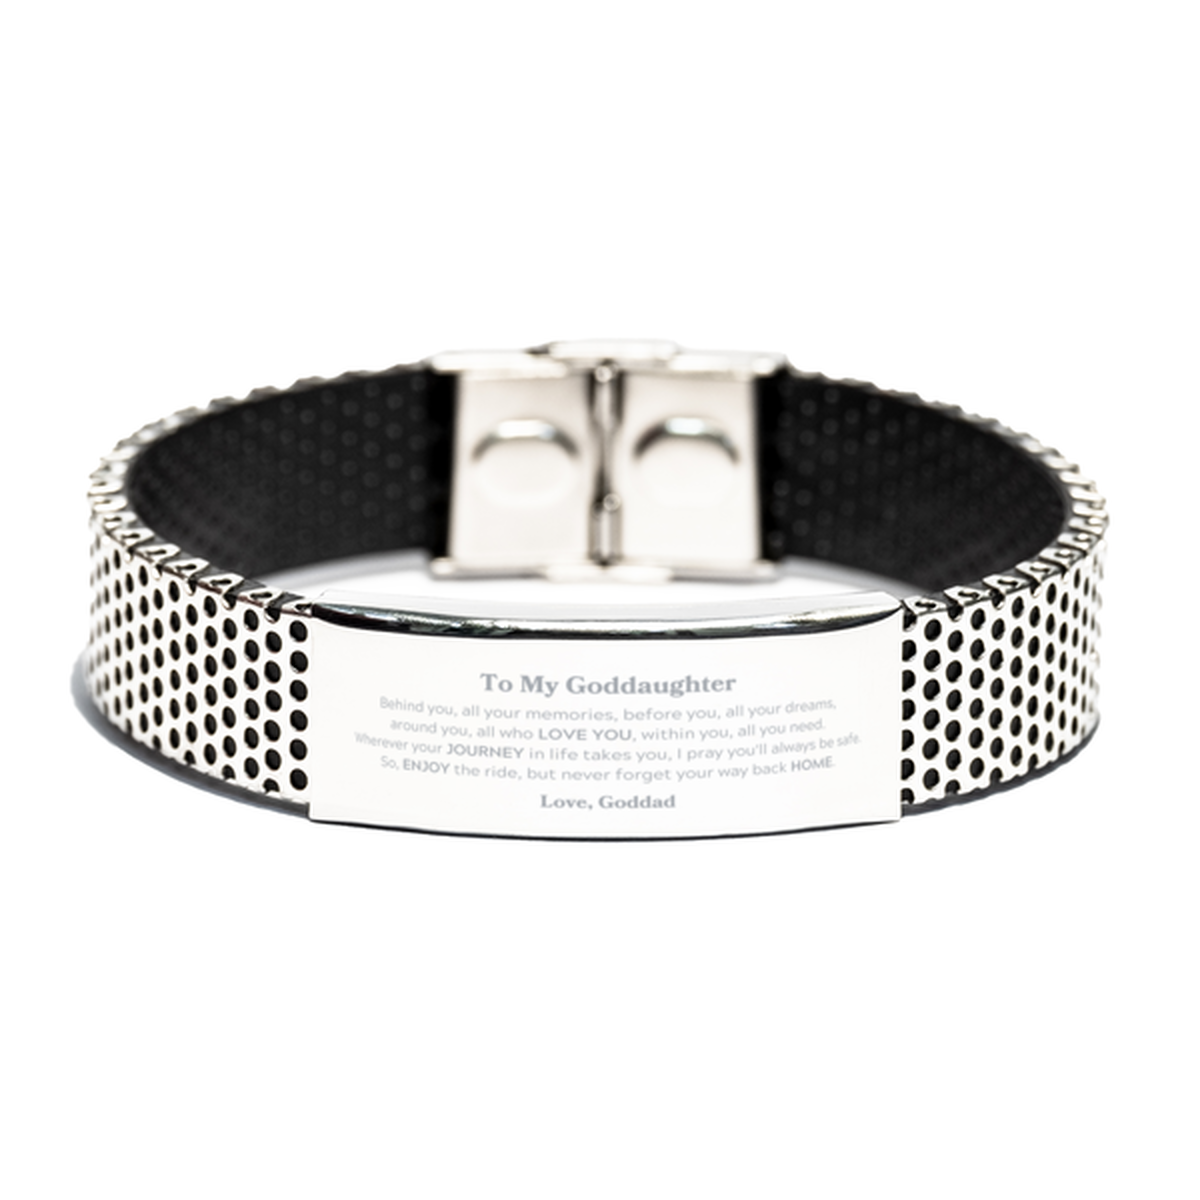 To My Goddaughter Graduation Gifts from Goddad, Goddaughter Stainless Steel Bracelet Christmas Birthday Gifts for Goddaughter Behind you, all your memories, before you, all your dreams. Love, Goddad